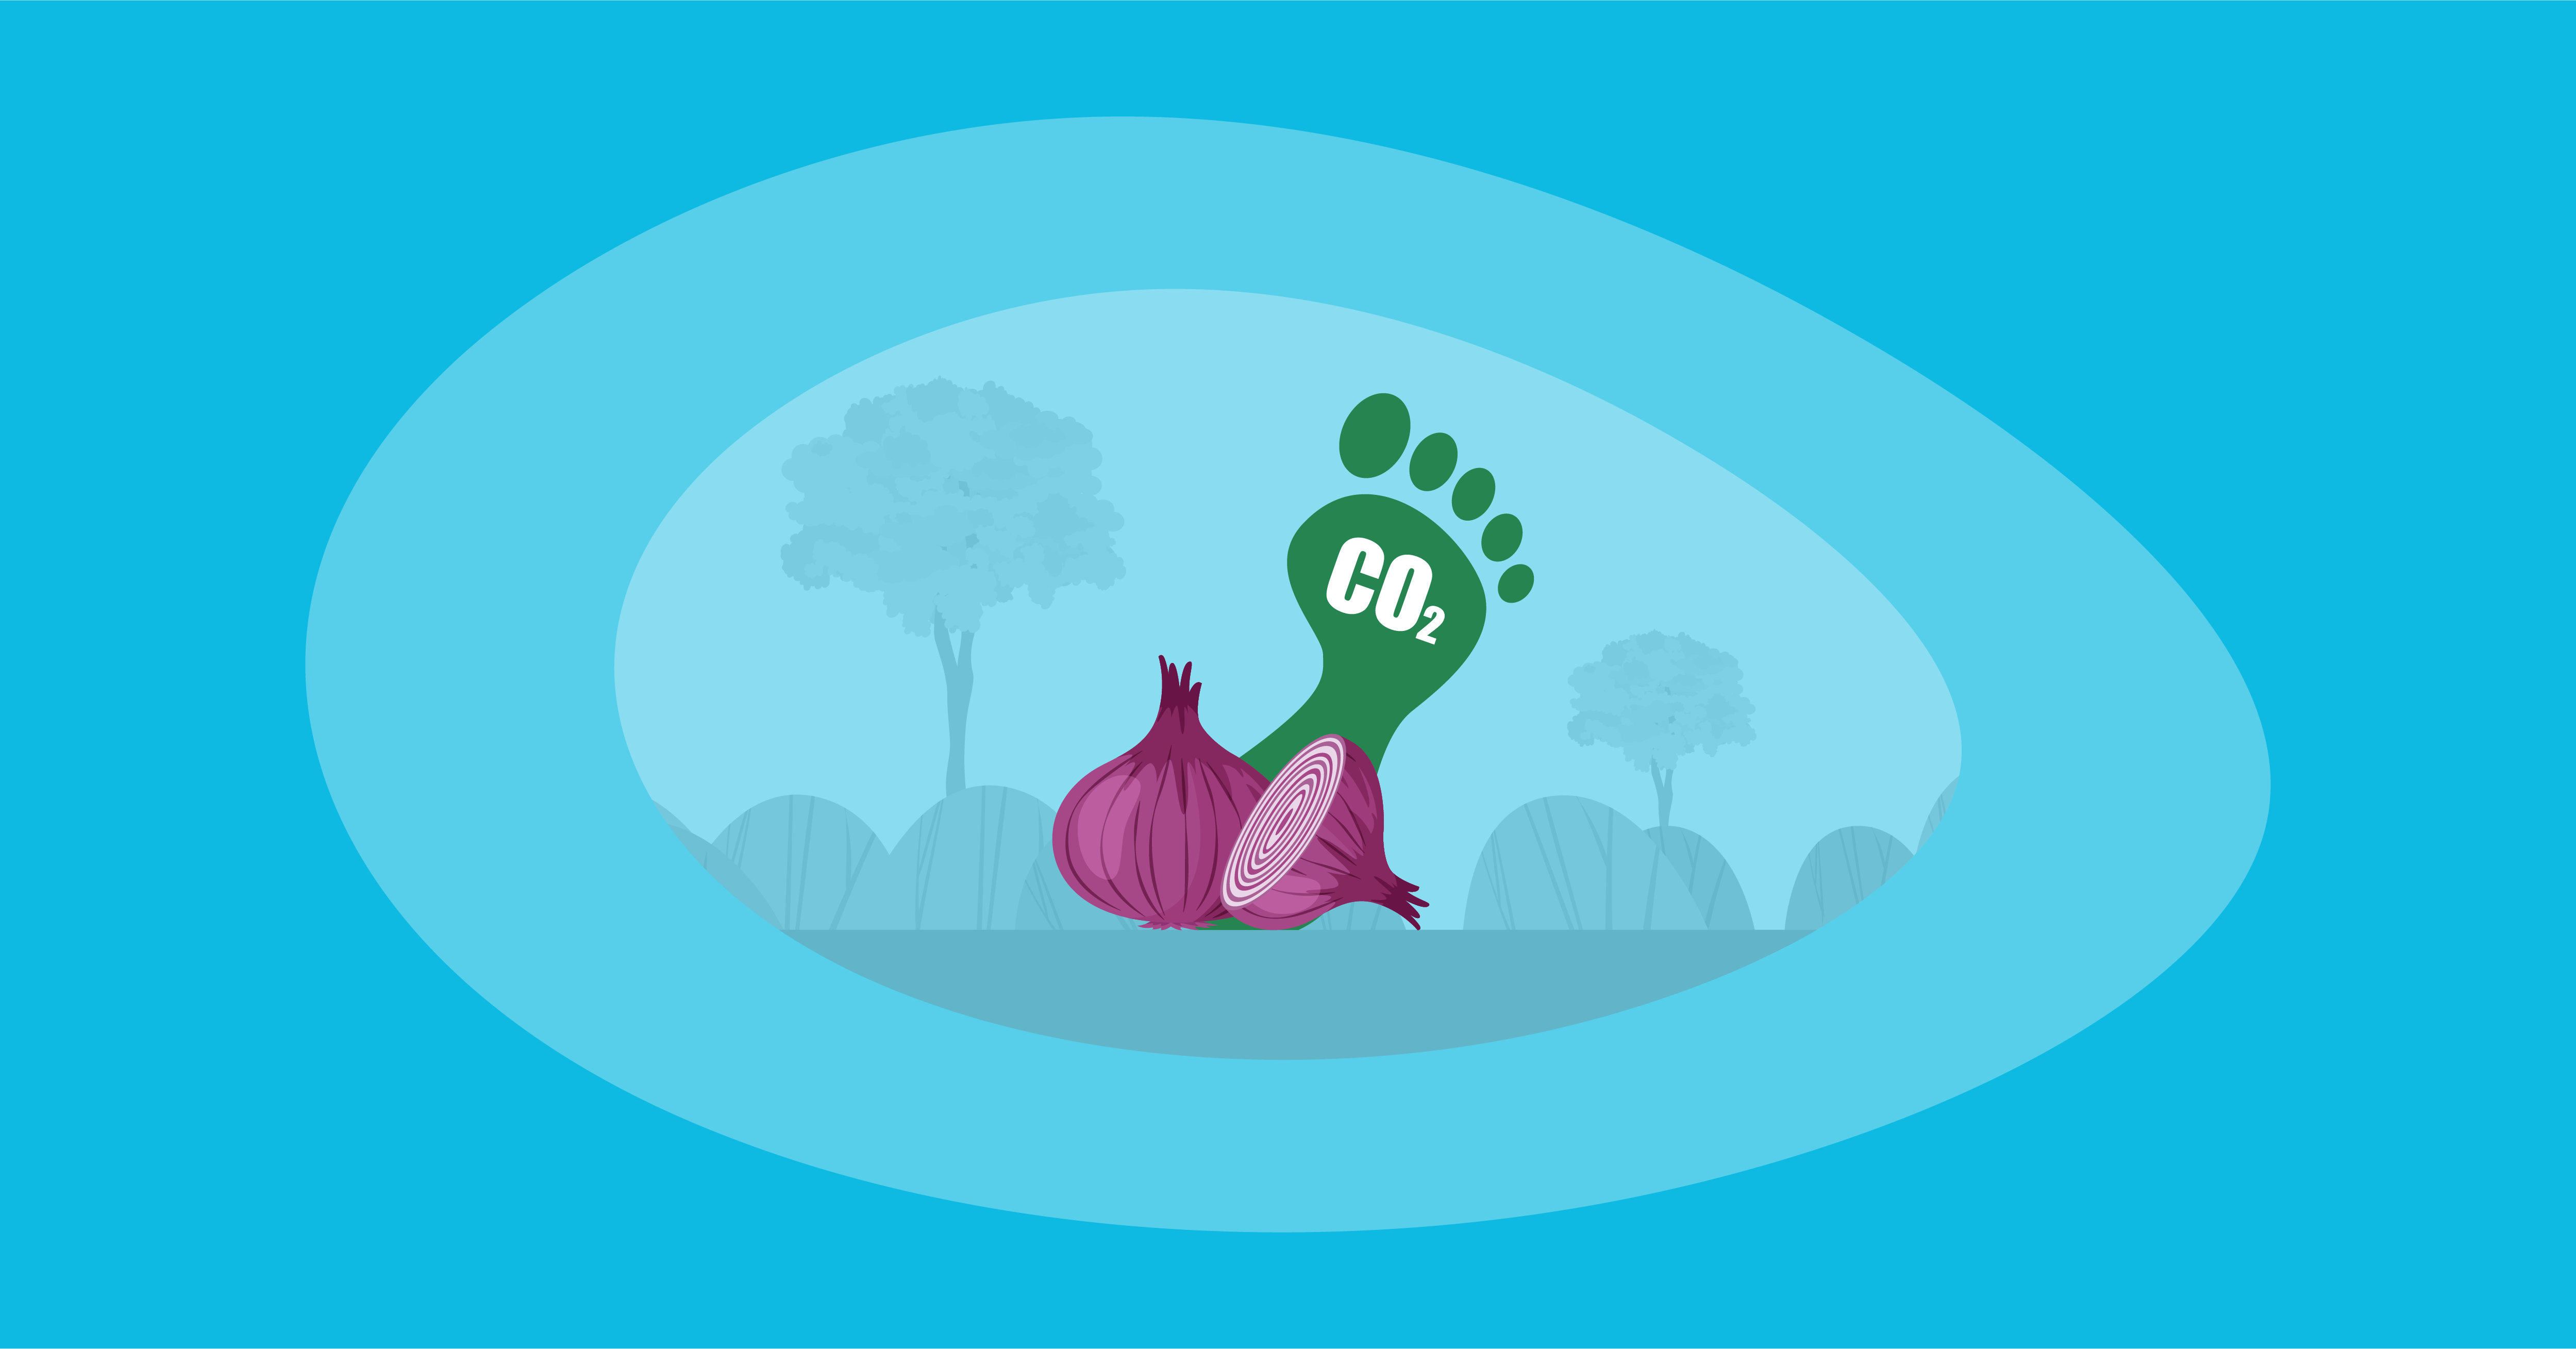 Attempted illustration of onions with their carbon footprint